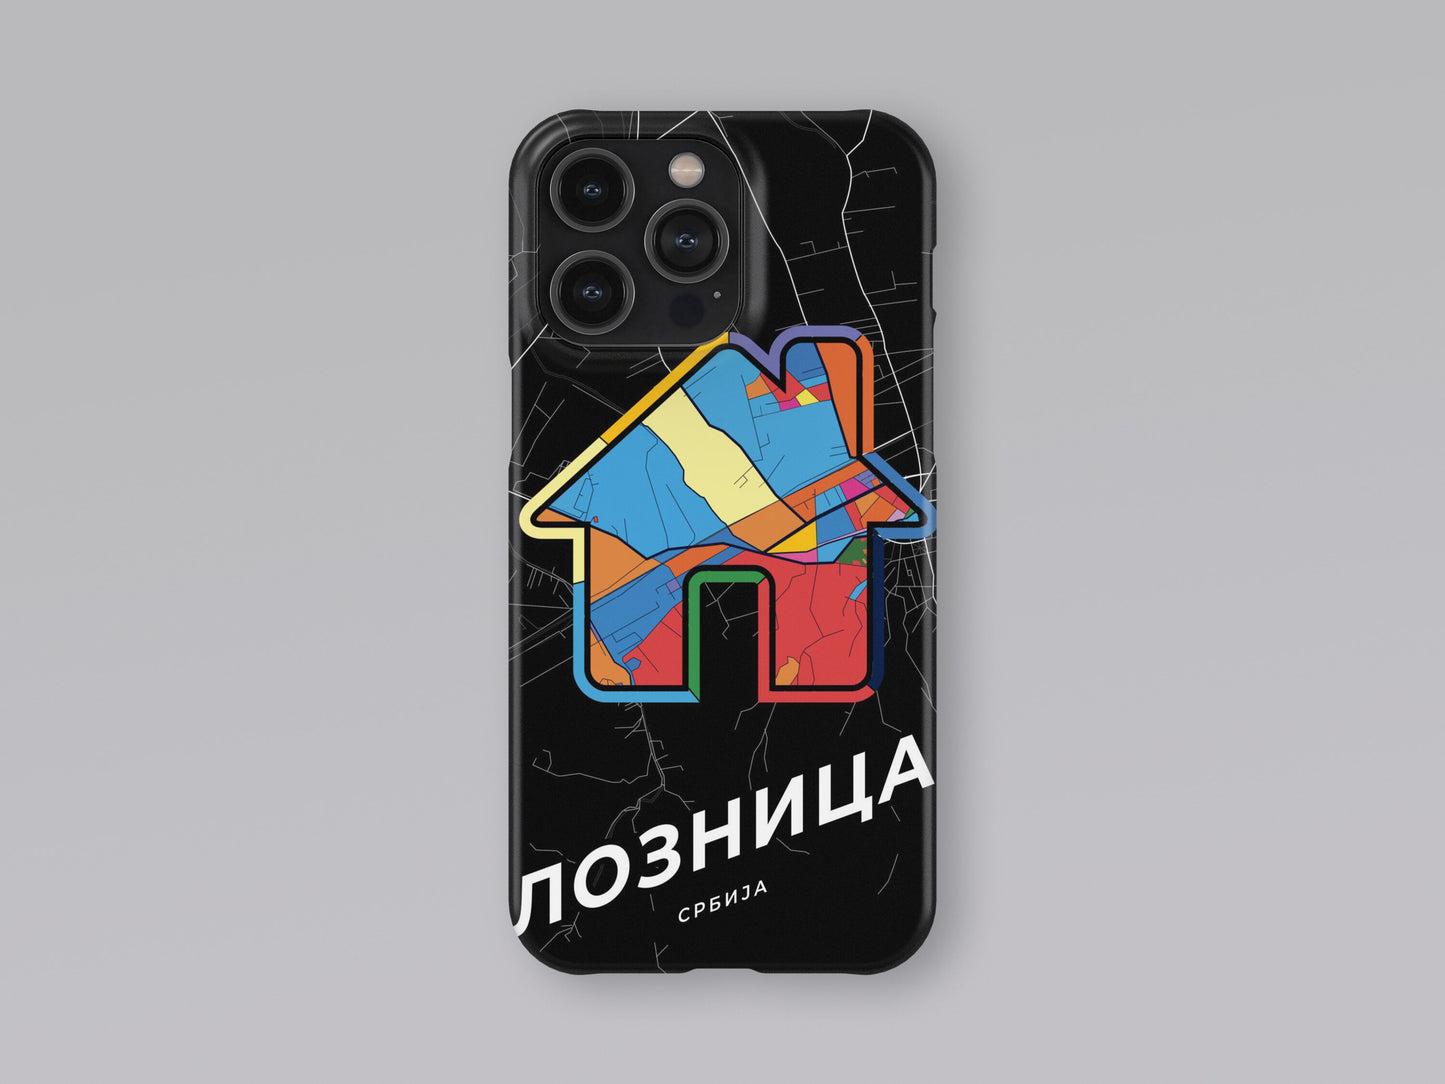 Loznica Serbia slim phone case with colorful icon. Birthday, wedding or housewarming gift. Couple match cases. 3